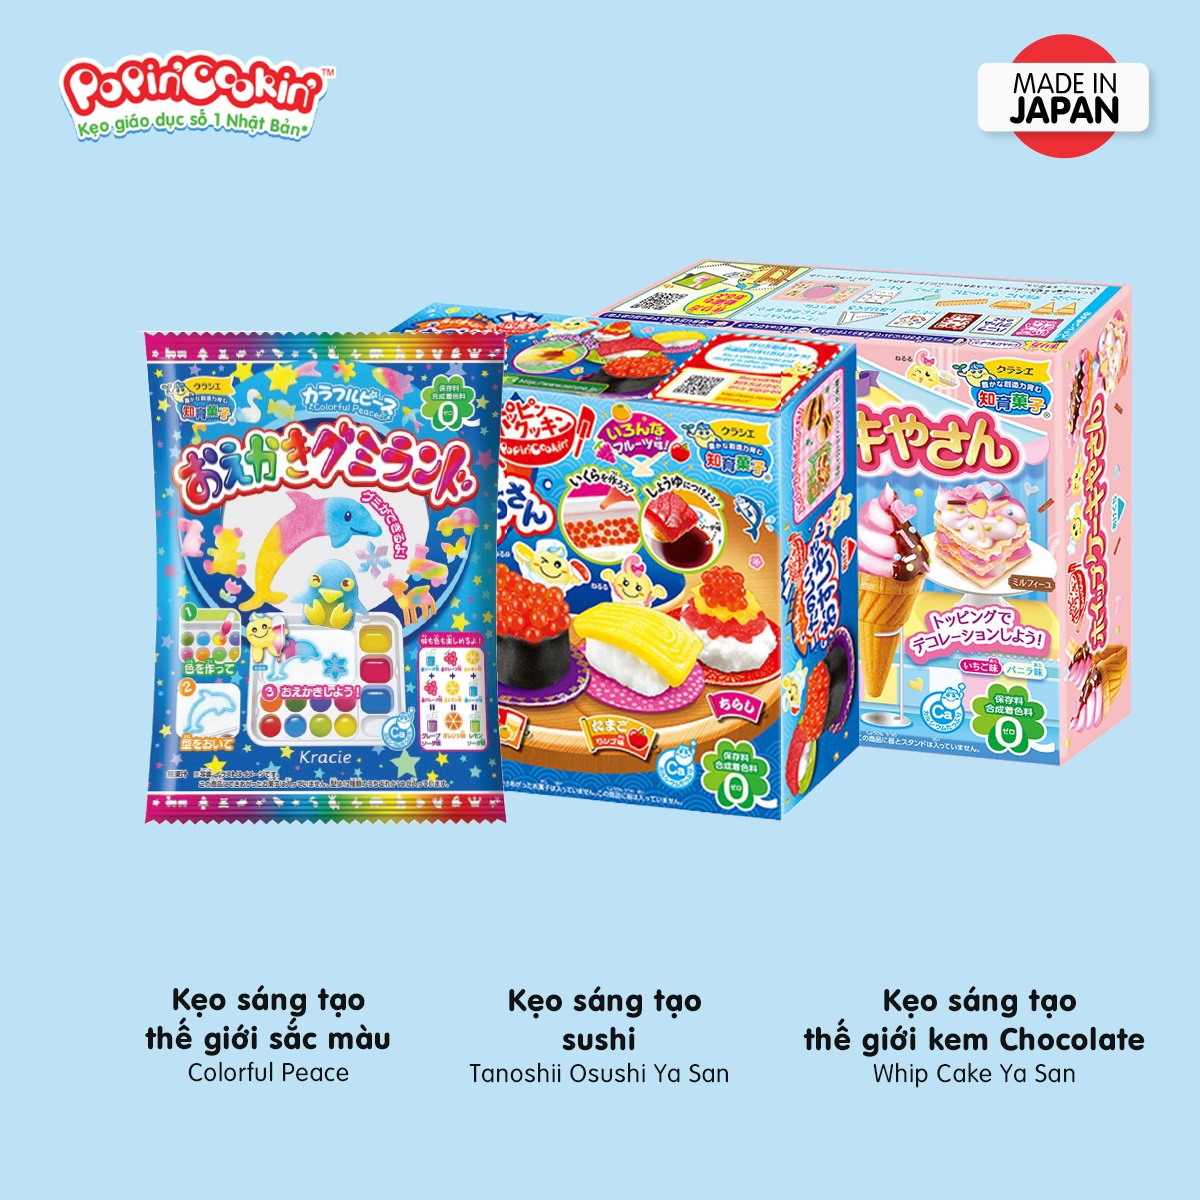 Combo 3 boxes of Popin Cookin candies with edible creative toys Colorful